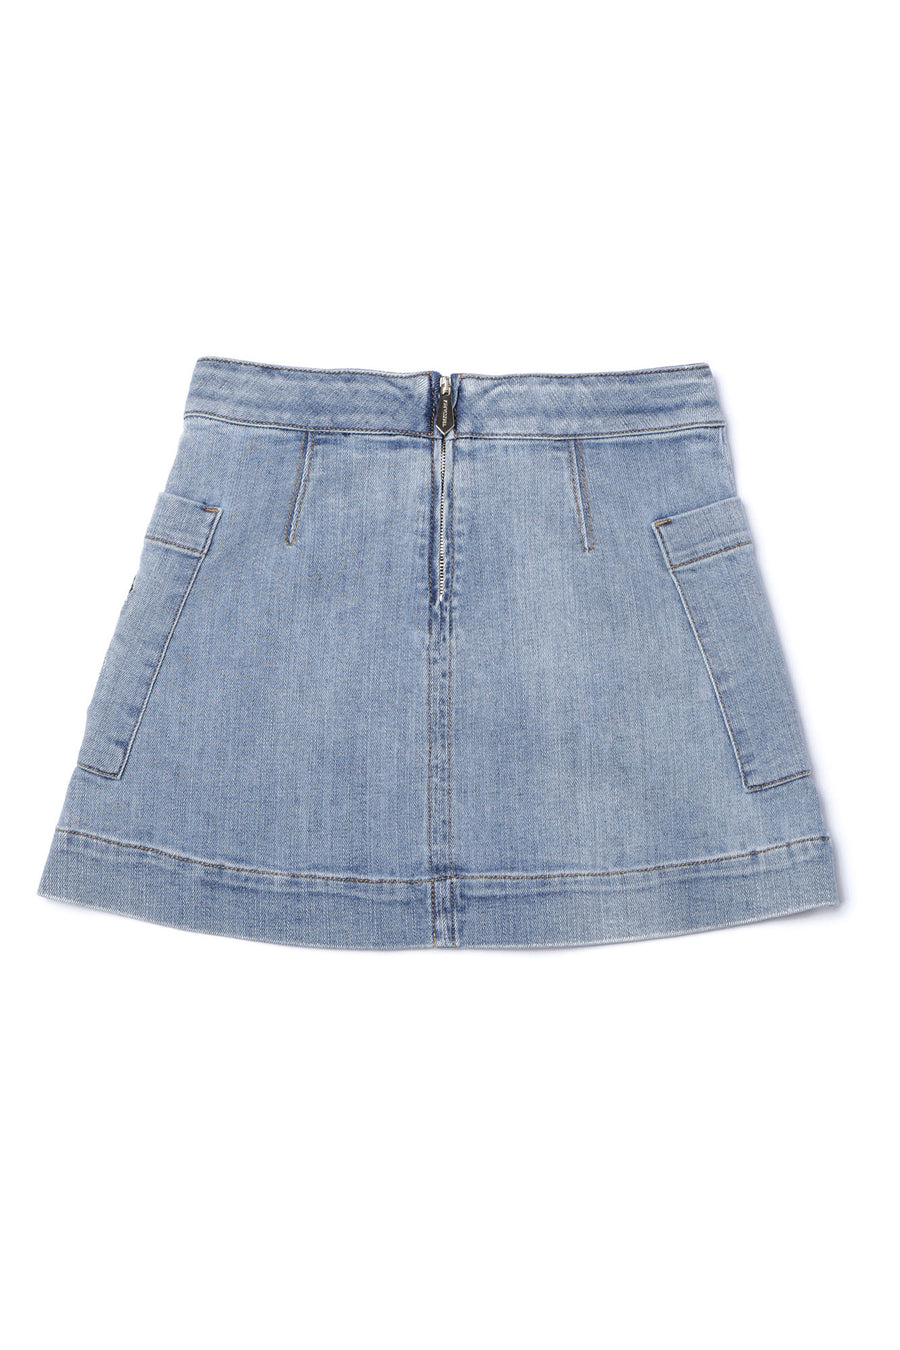 Butterfly Denim Wash Skirt by Trussardi - Flying Colors